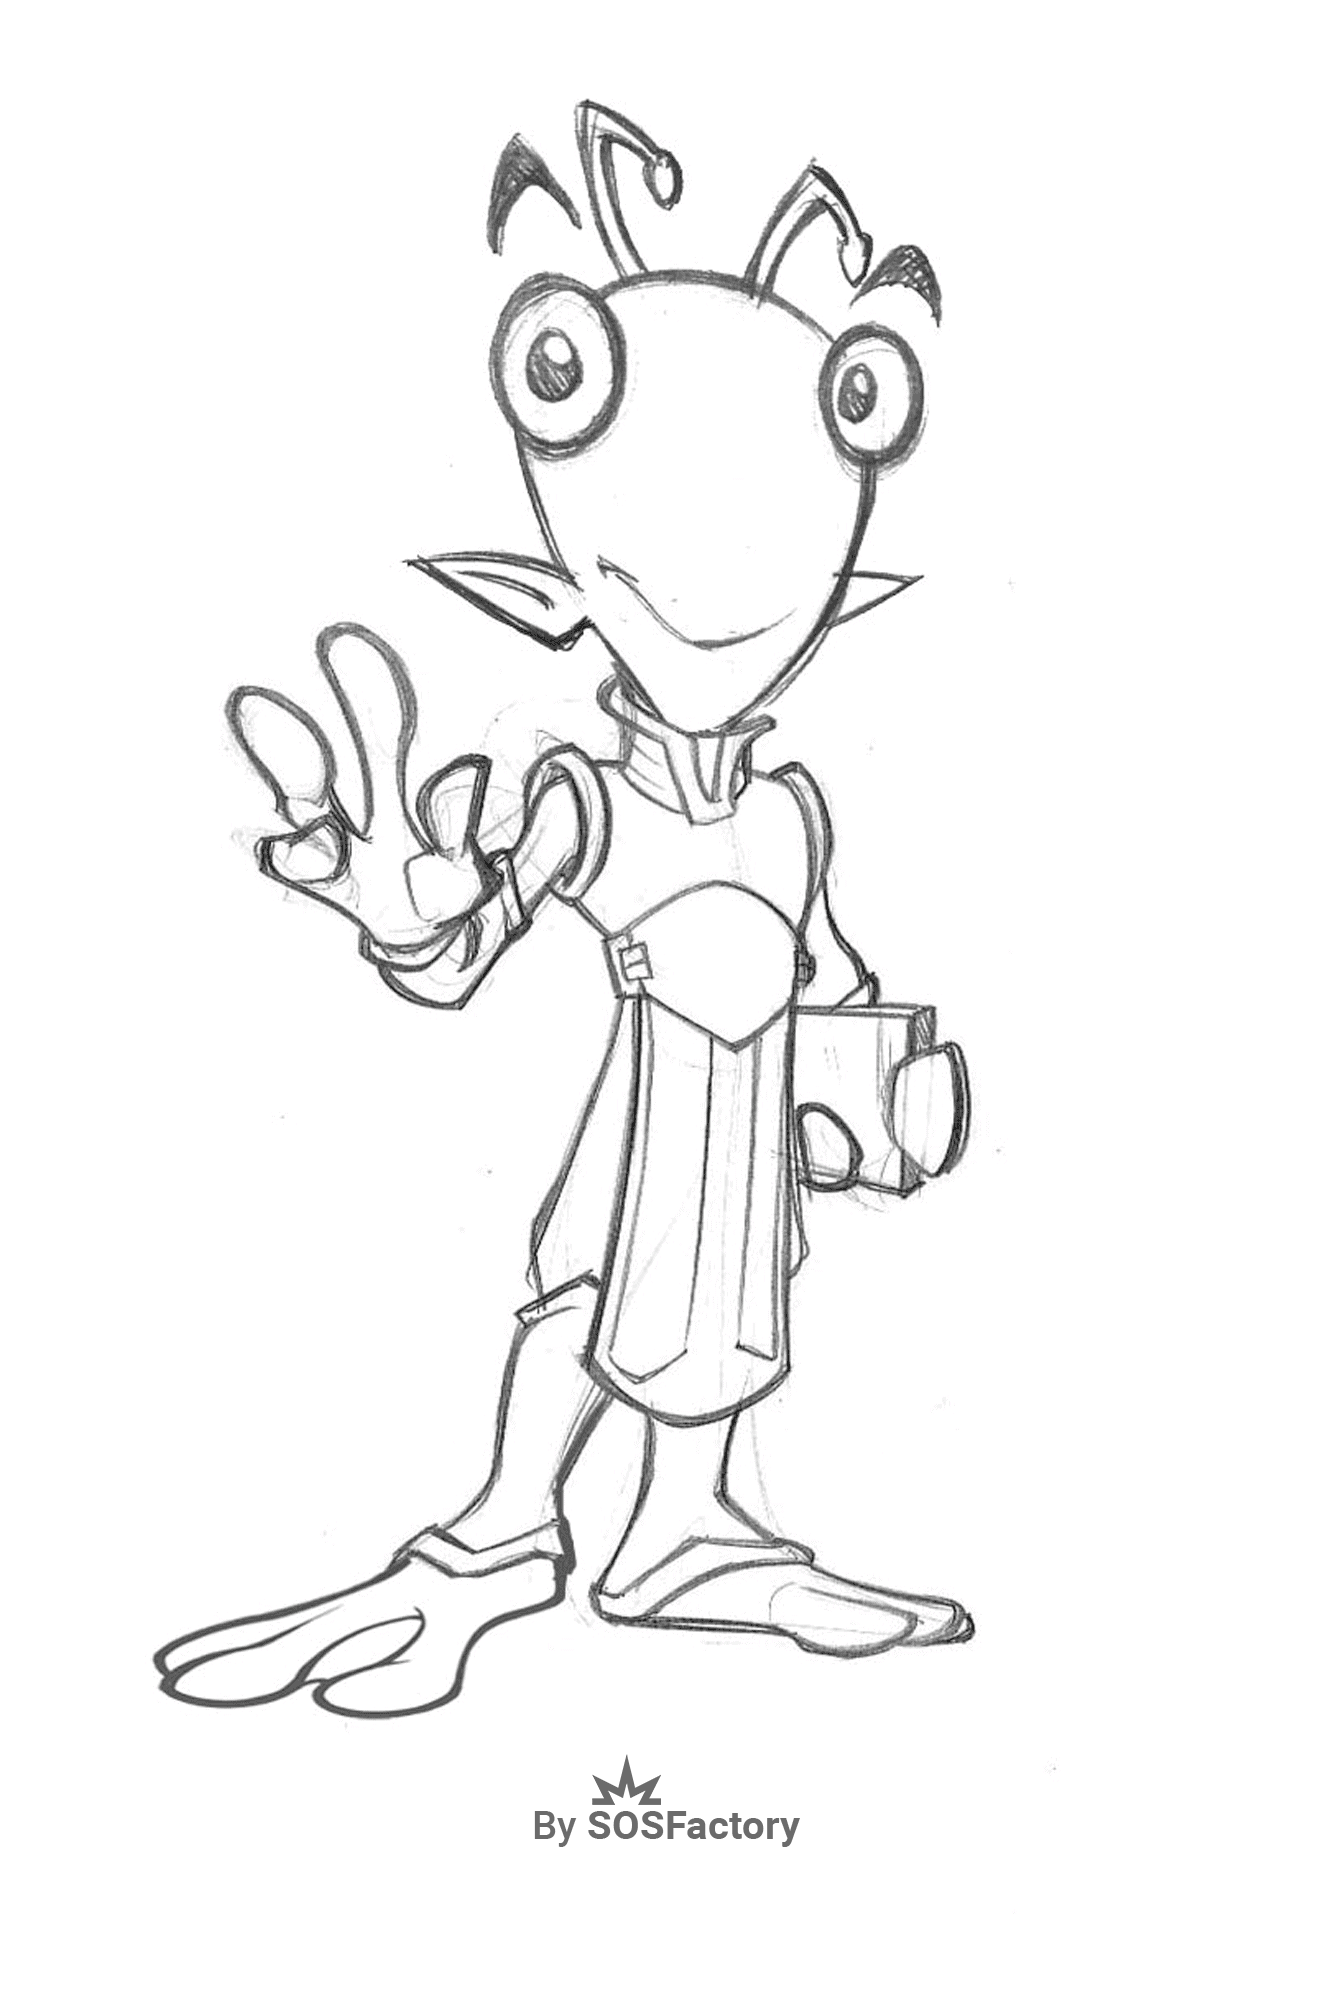 Alien Cartoon character for drawing